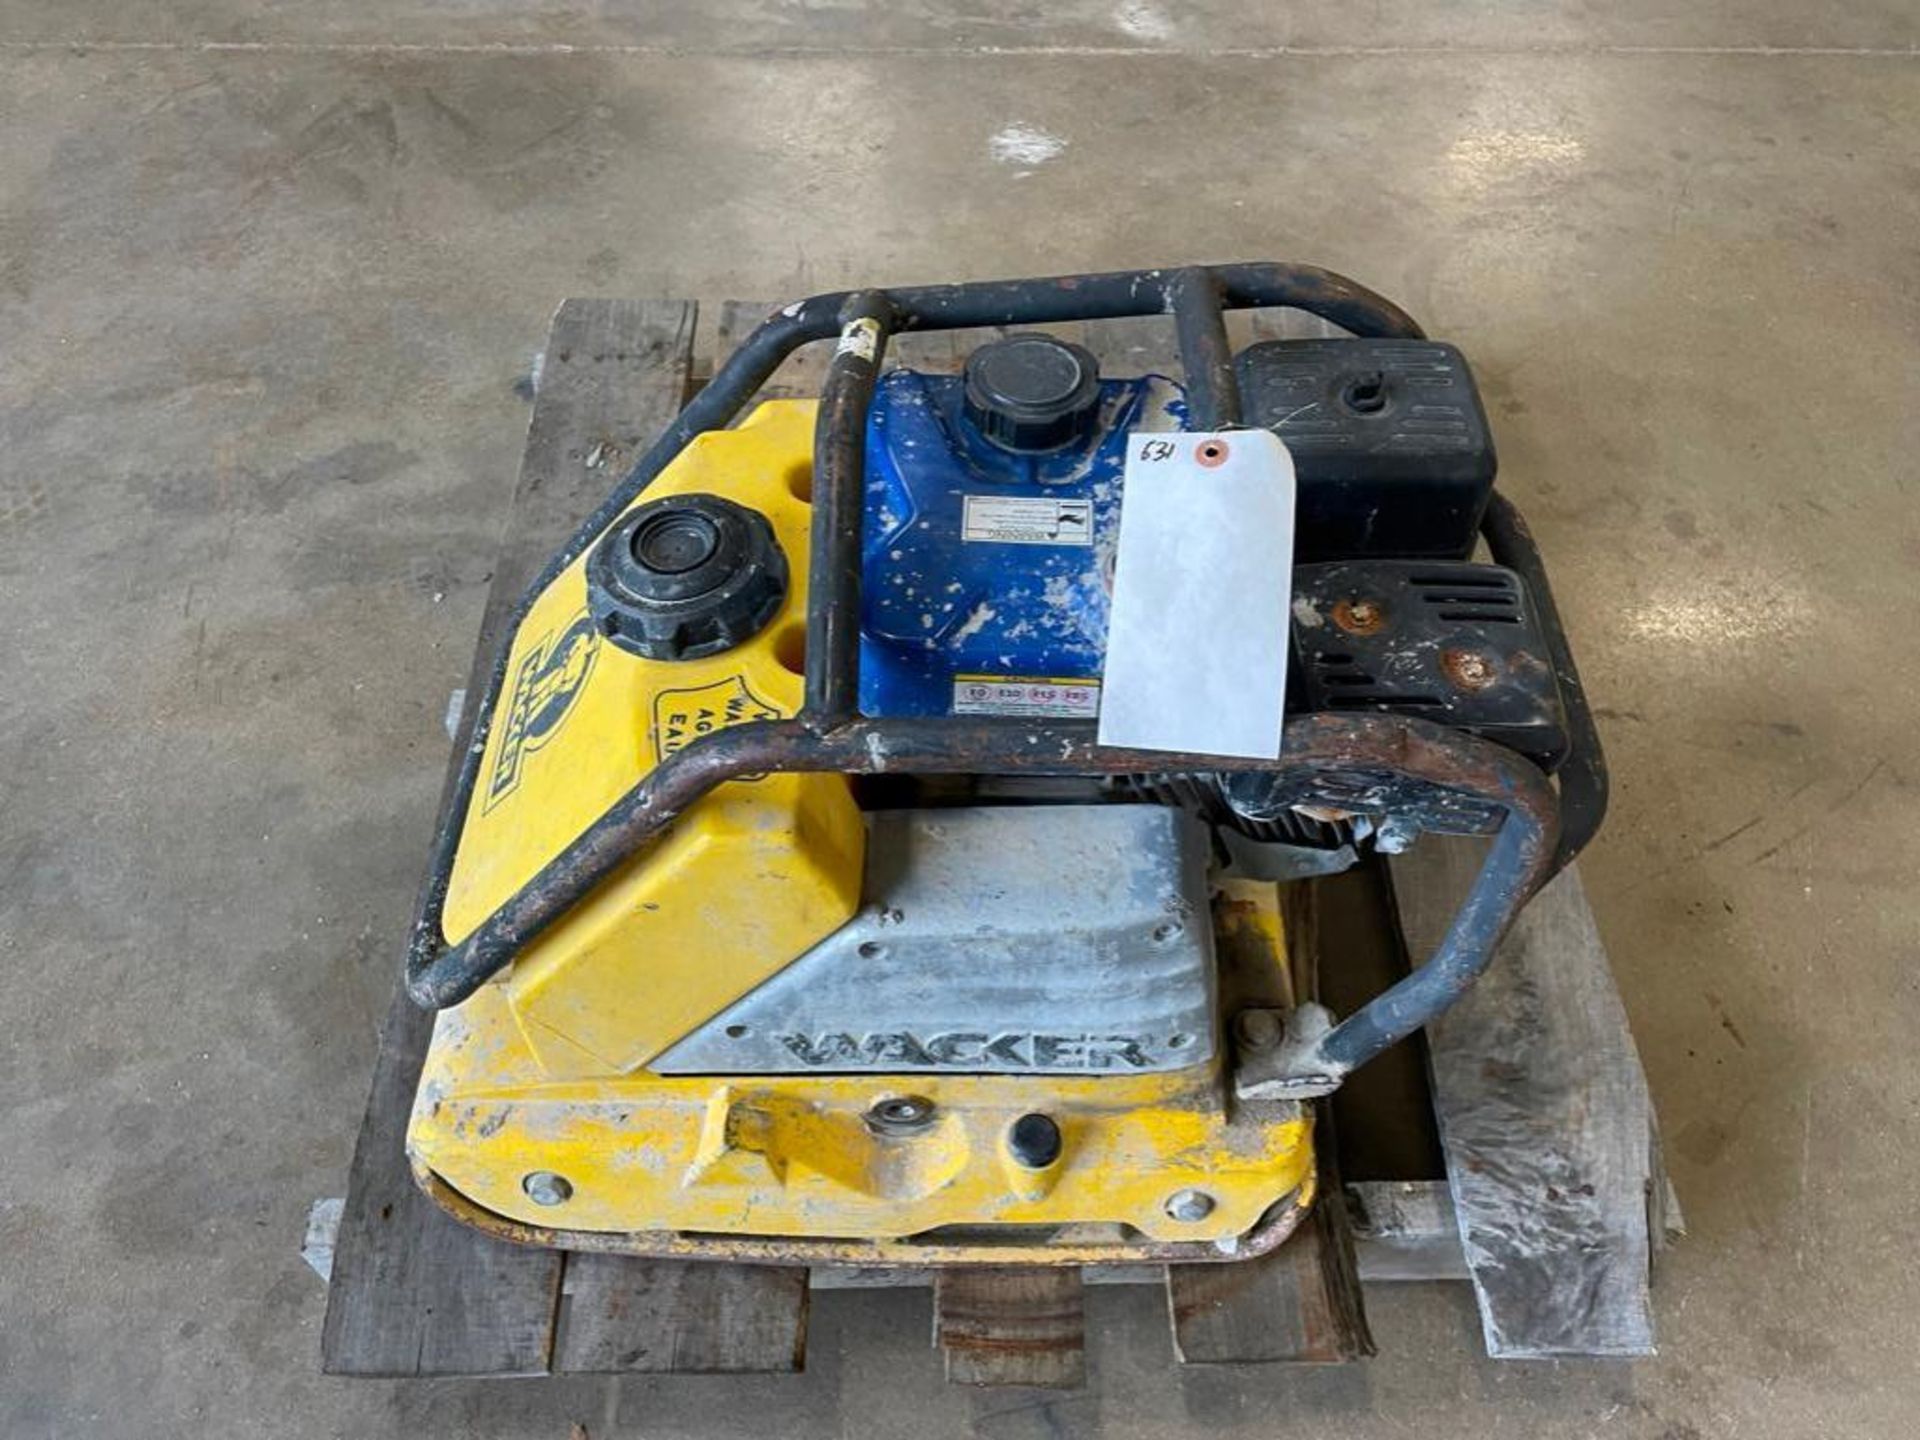 Wacker Plate Compactor with Powerhorse 212 cc Engine.  Located in Hazelwood, MO